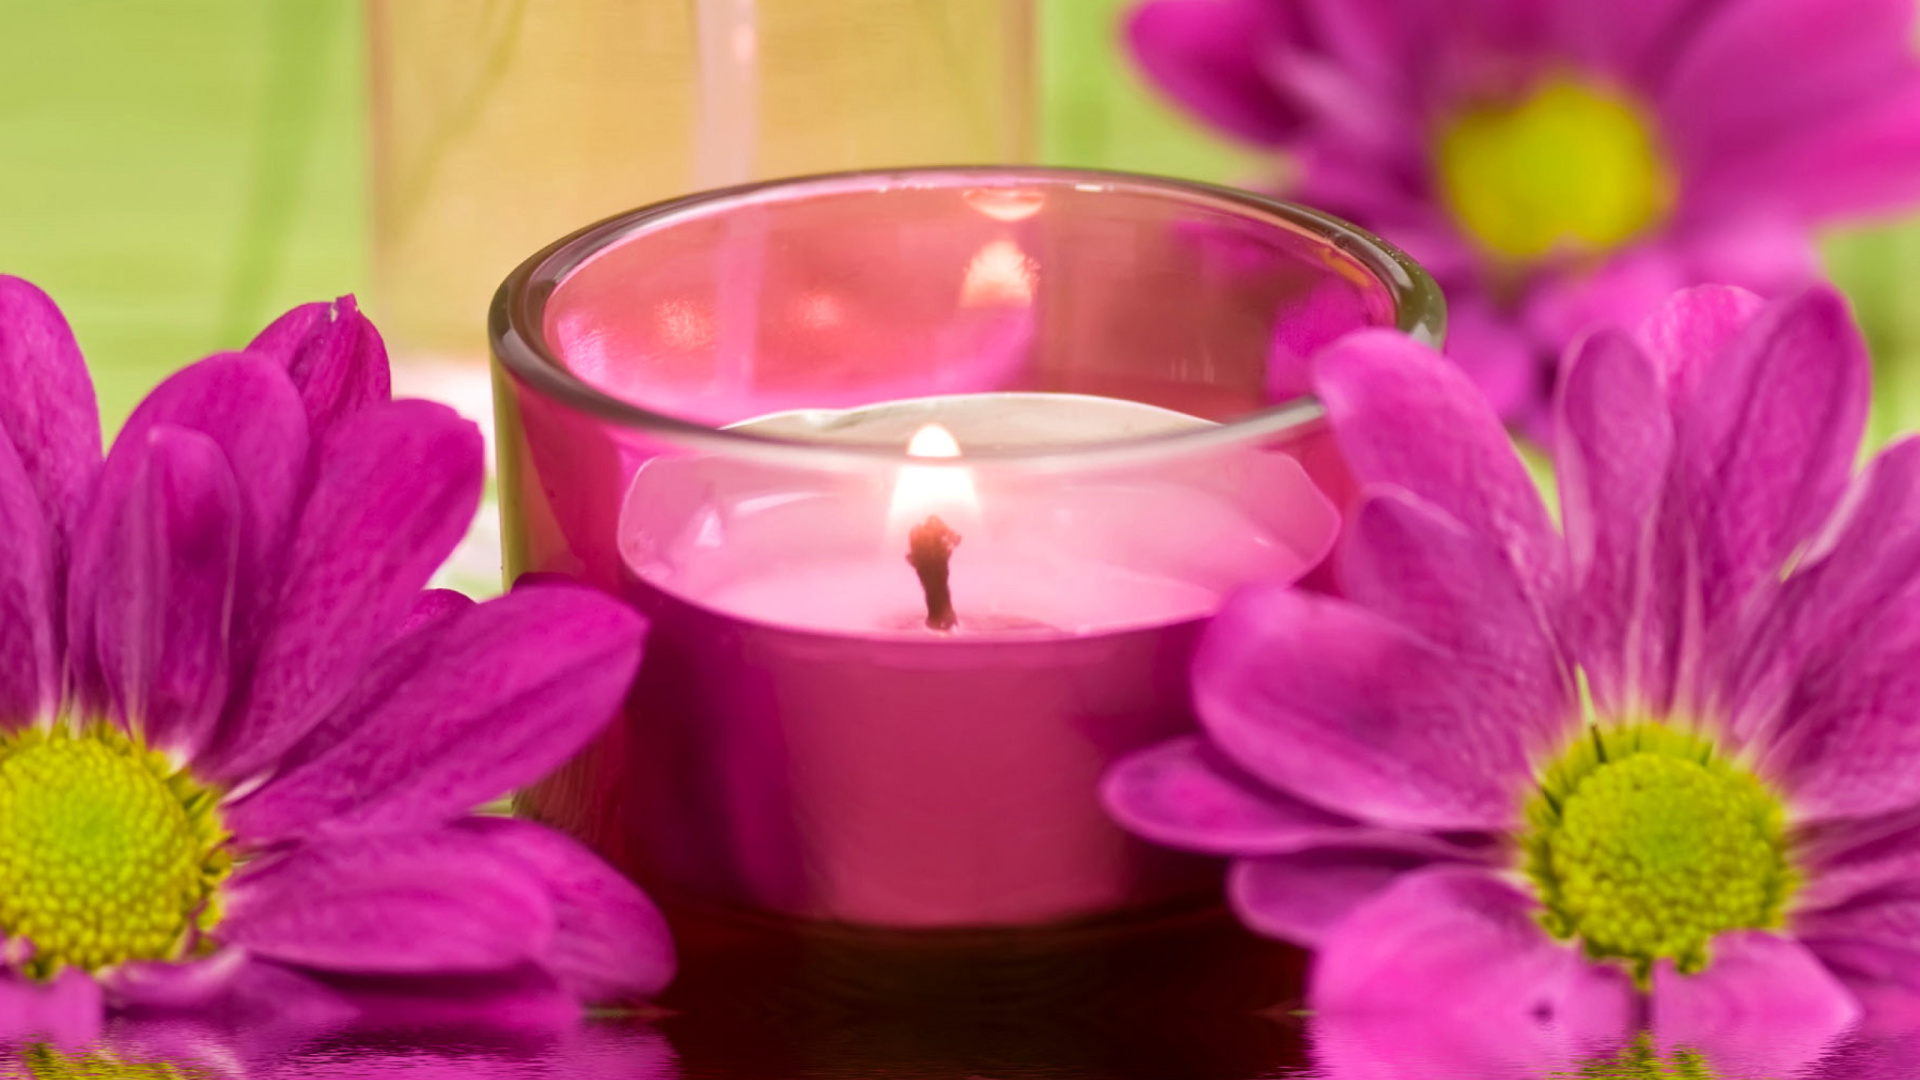 Das Violet Candle and Flowers Wallpaper 1920x1080